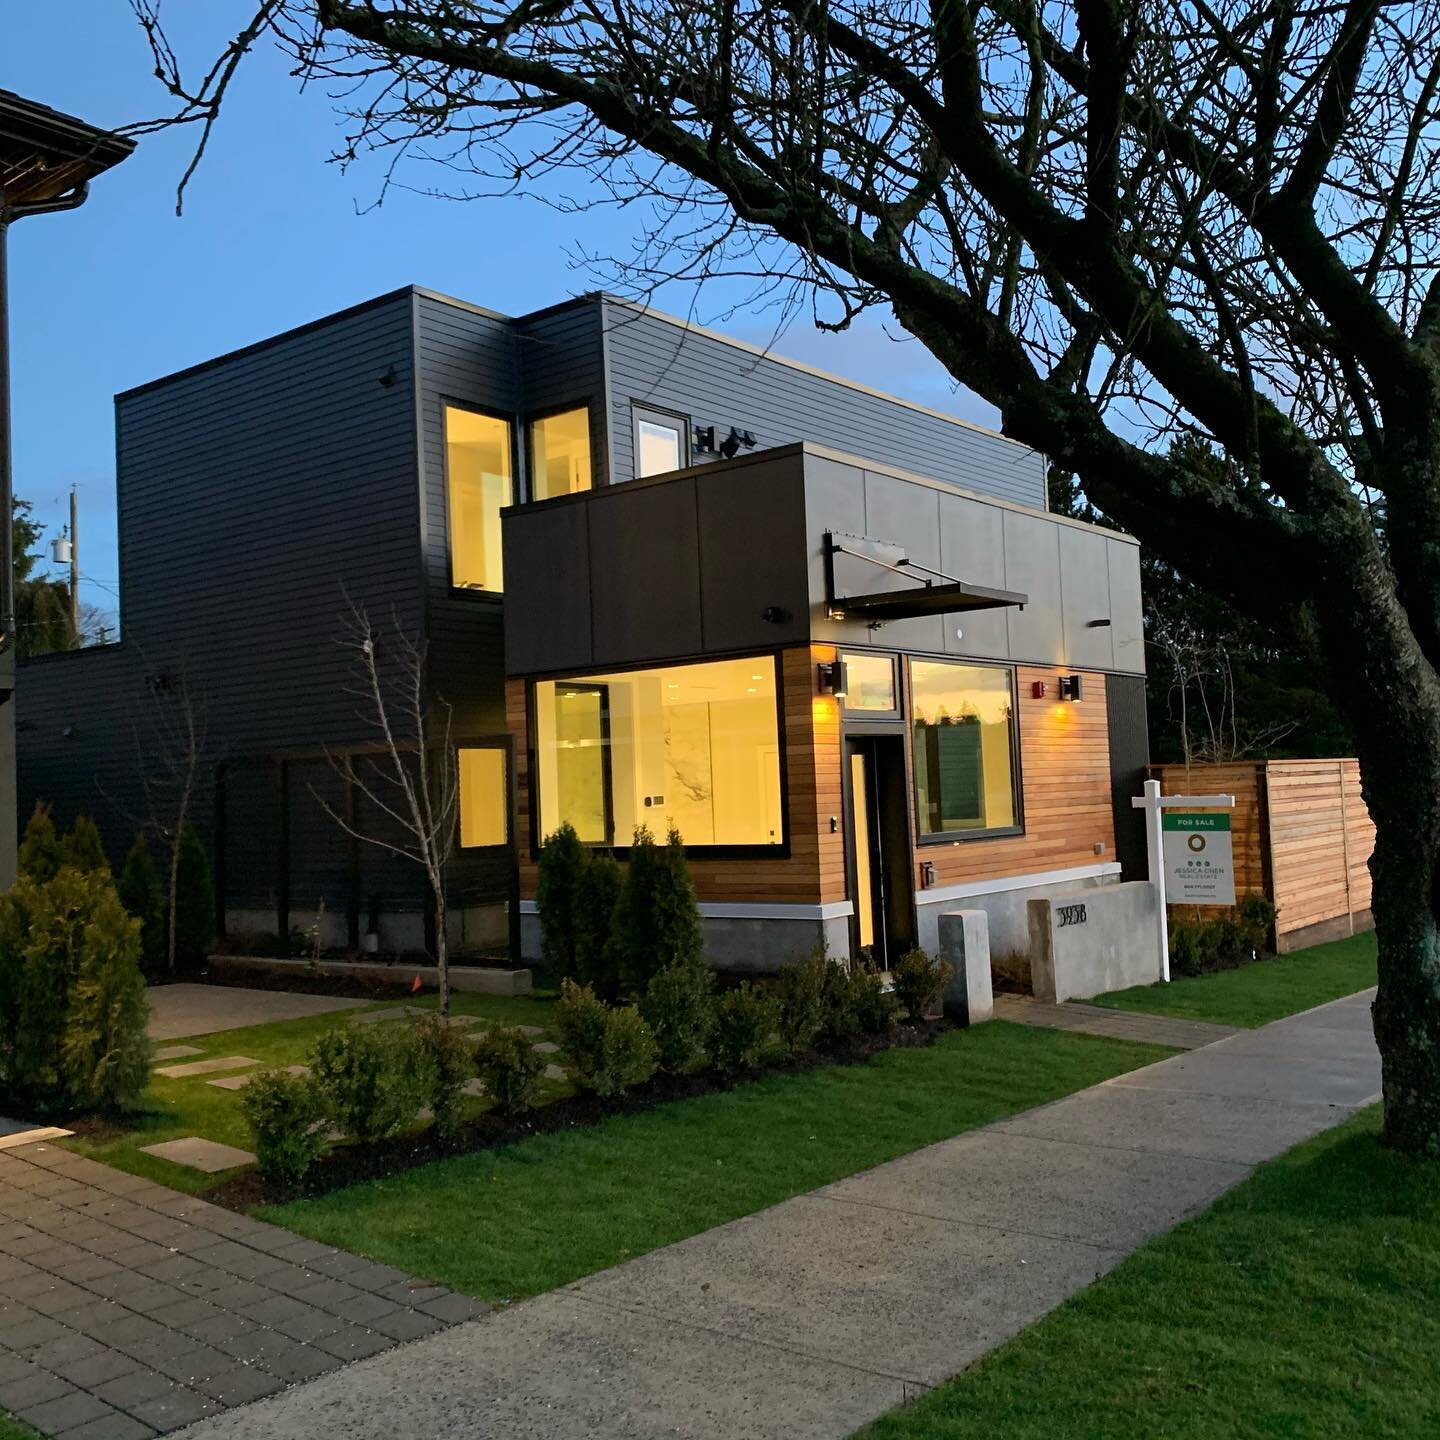 It&rsquo;s finally ready!! Come join the team for a glass of wine and view our latest project! Tomorrow evening January 30th 2020 @ 5:30-7:30pm 604 E.23rd Ave Vancouver